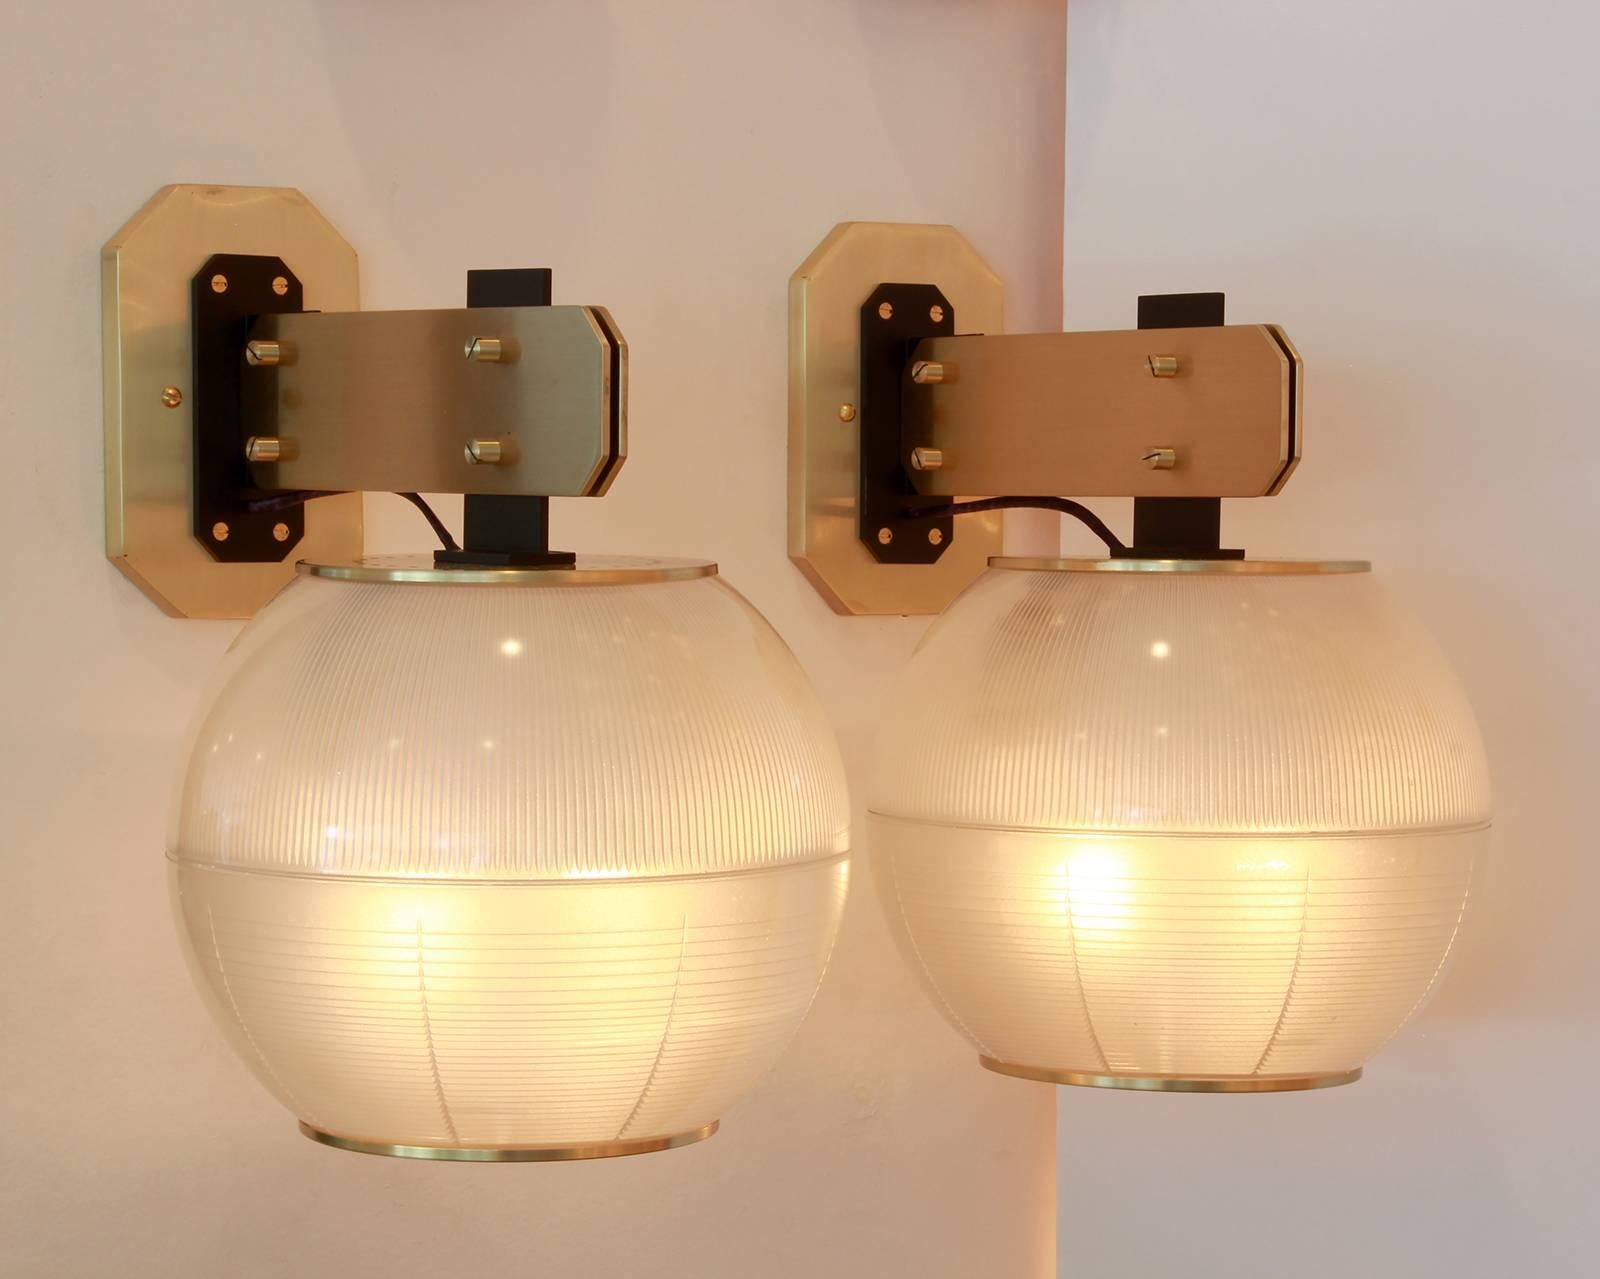 Pair of globe sconces with ribbed and textured glass. In the style of Gardella, possibly made by Stilnovo, circa 1964. Large in scale with beautiful brass hardware. Newly rewired.